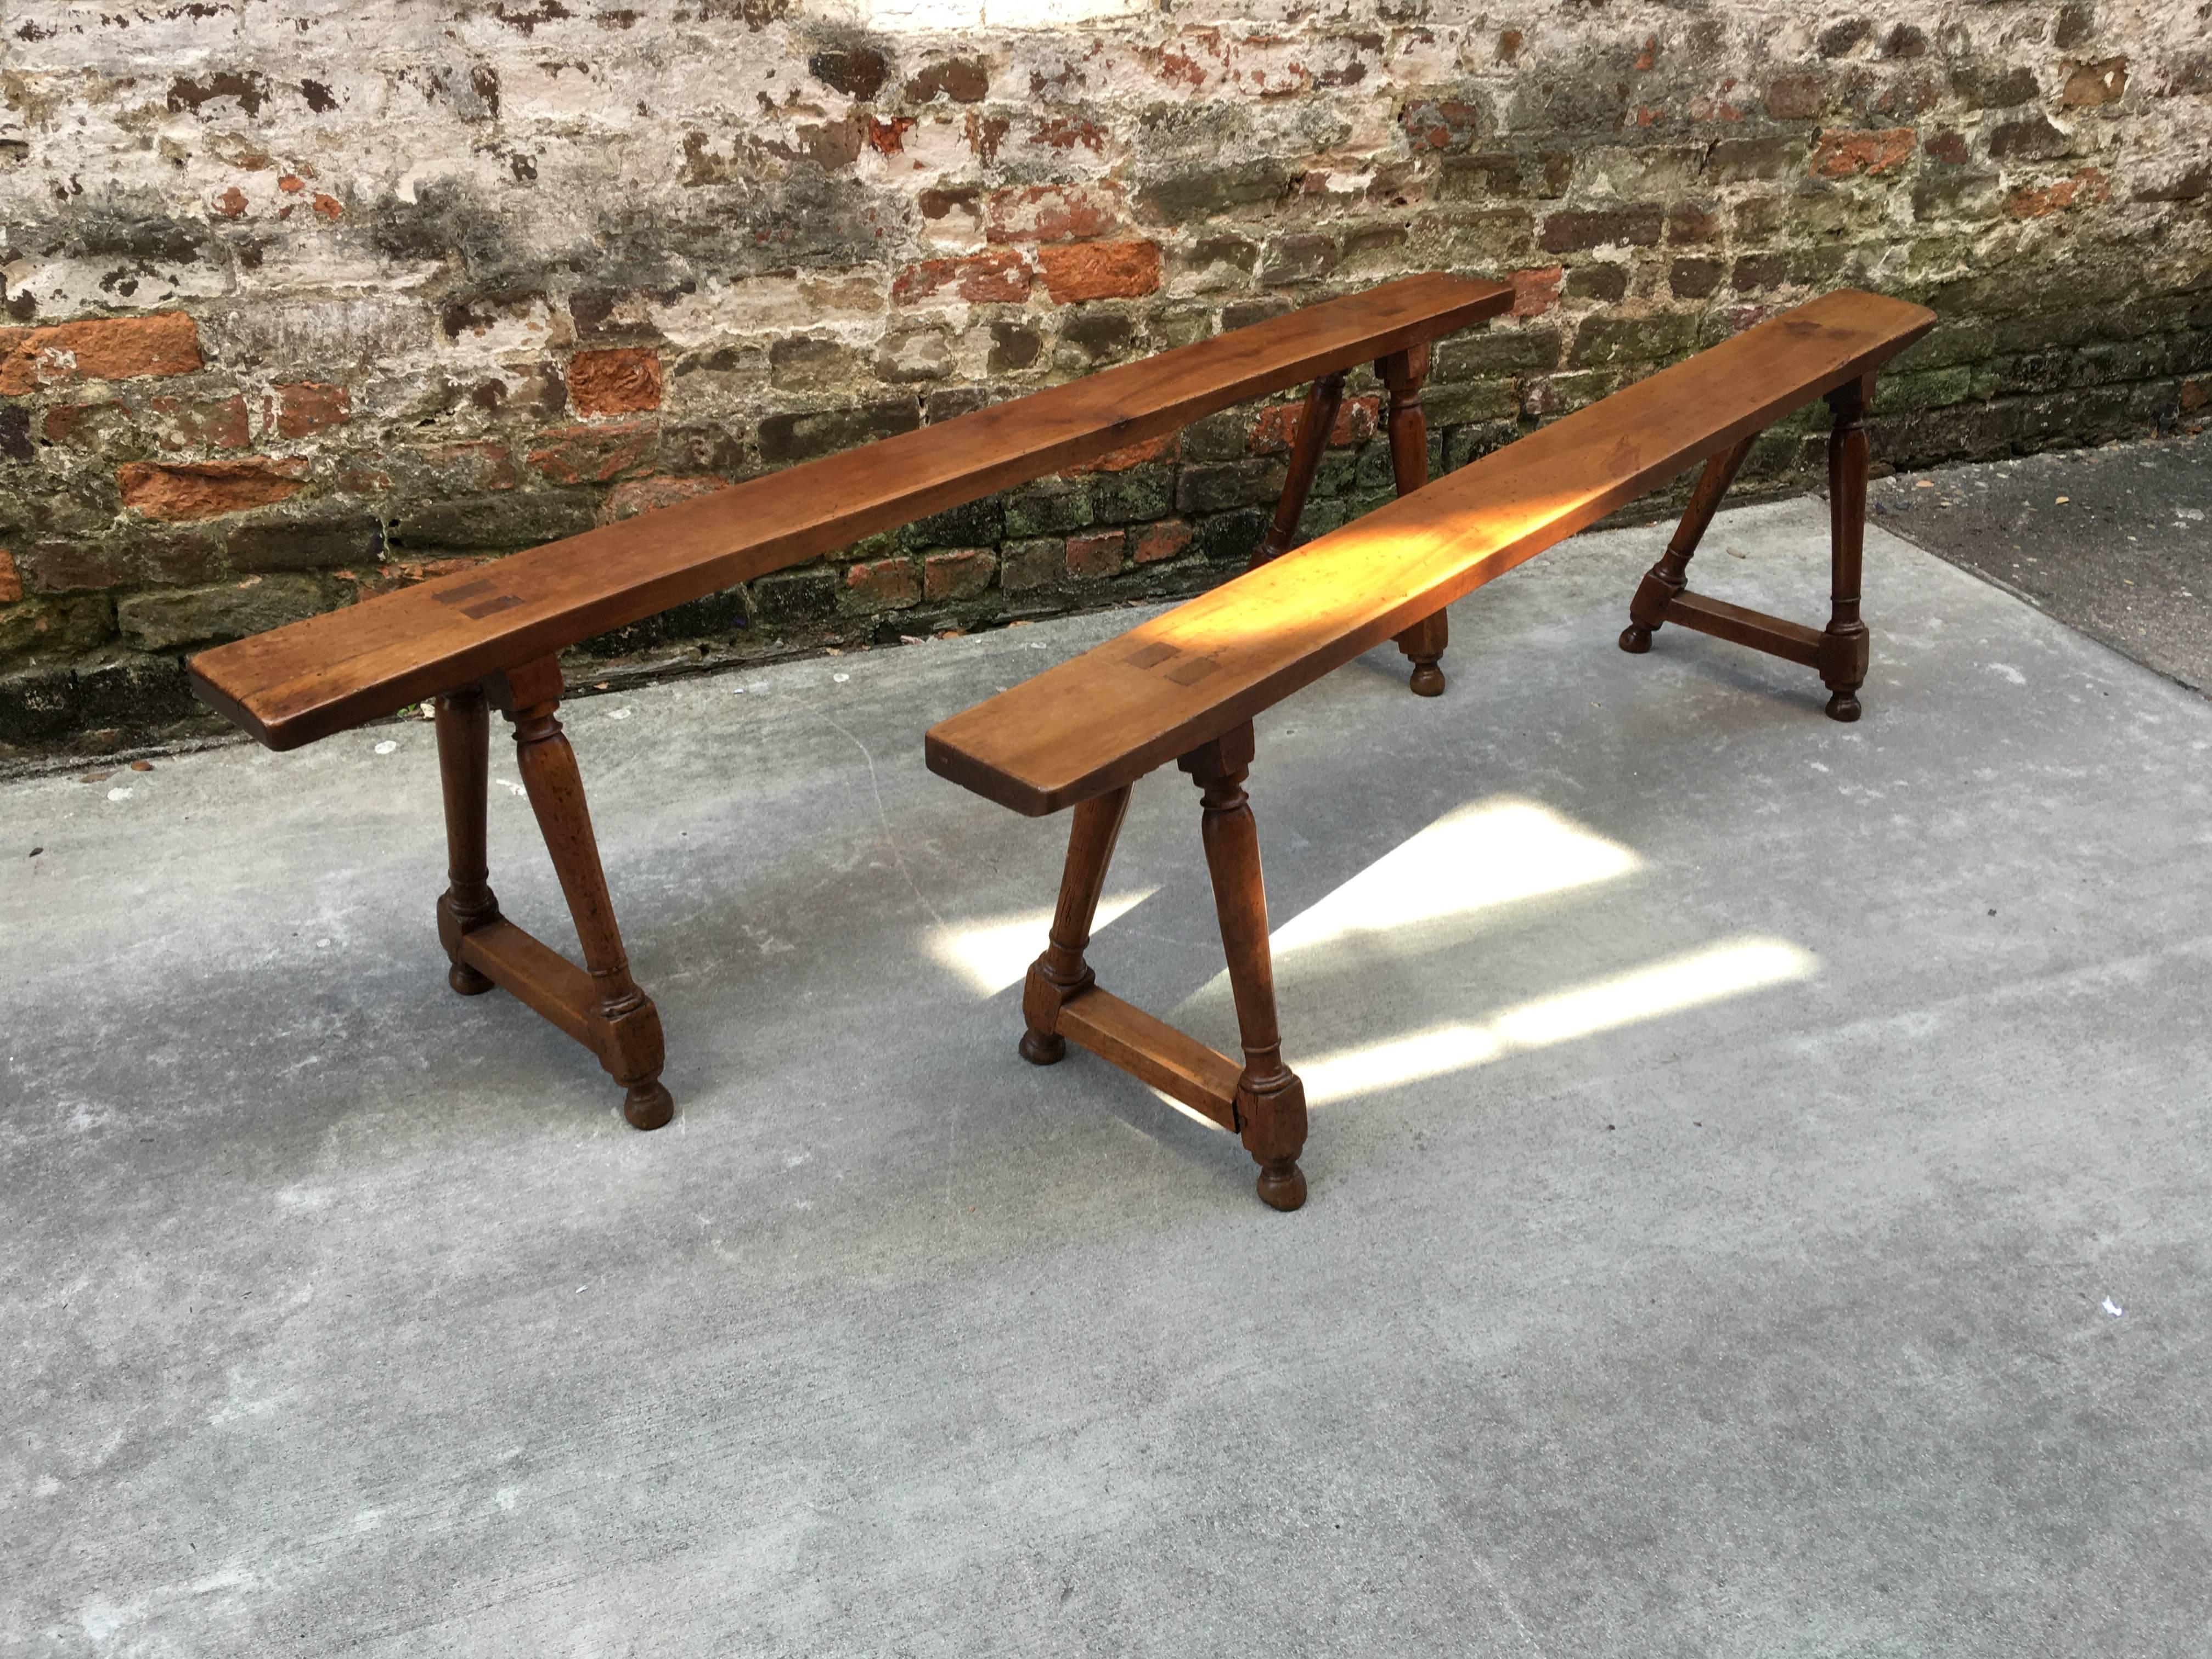 Pair of French walnut benches with turned leg stretcher bases. Very warm color and very stable for small sitting surface.